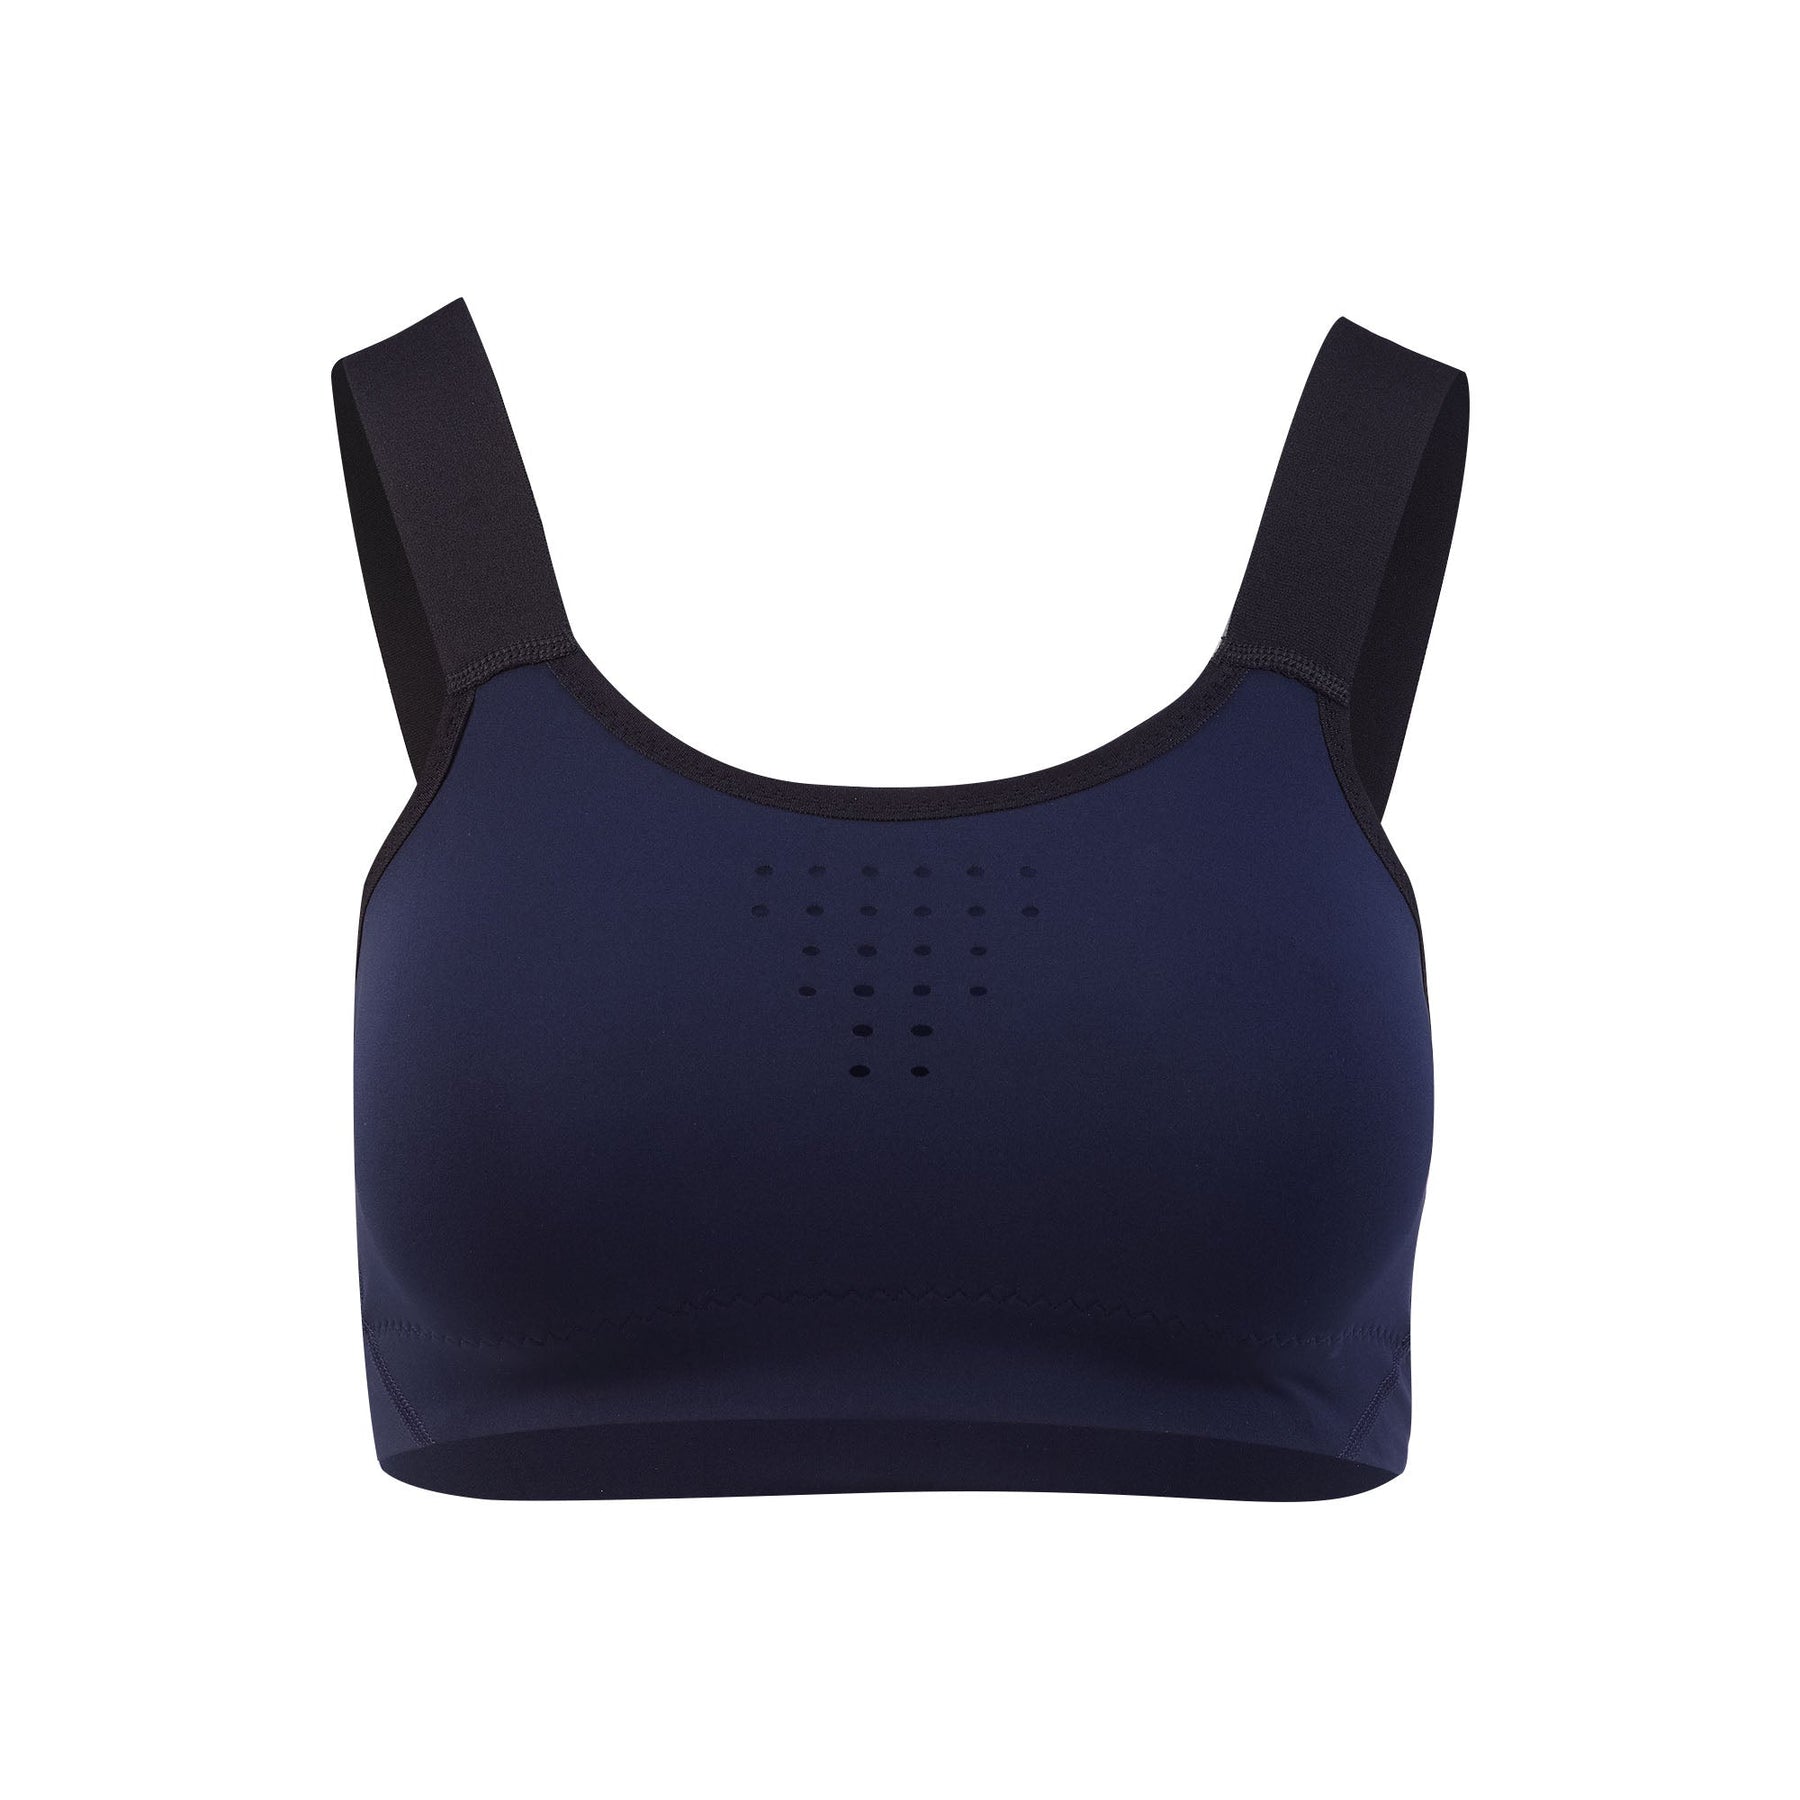 Women's strong support bra with crossed straps - Dark blue